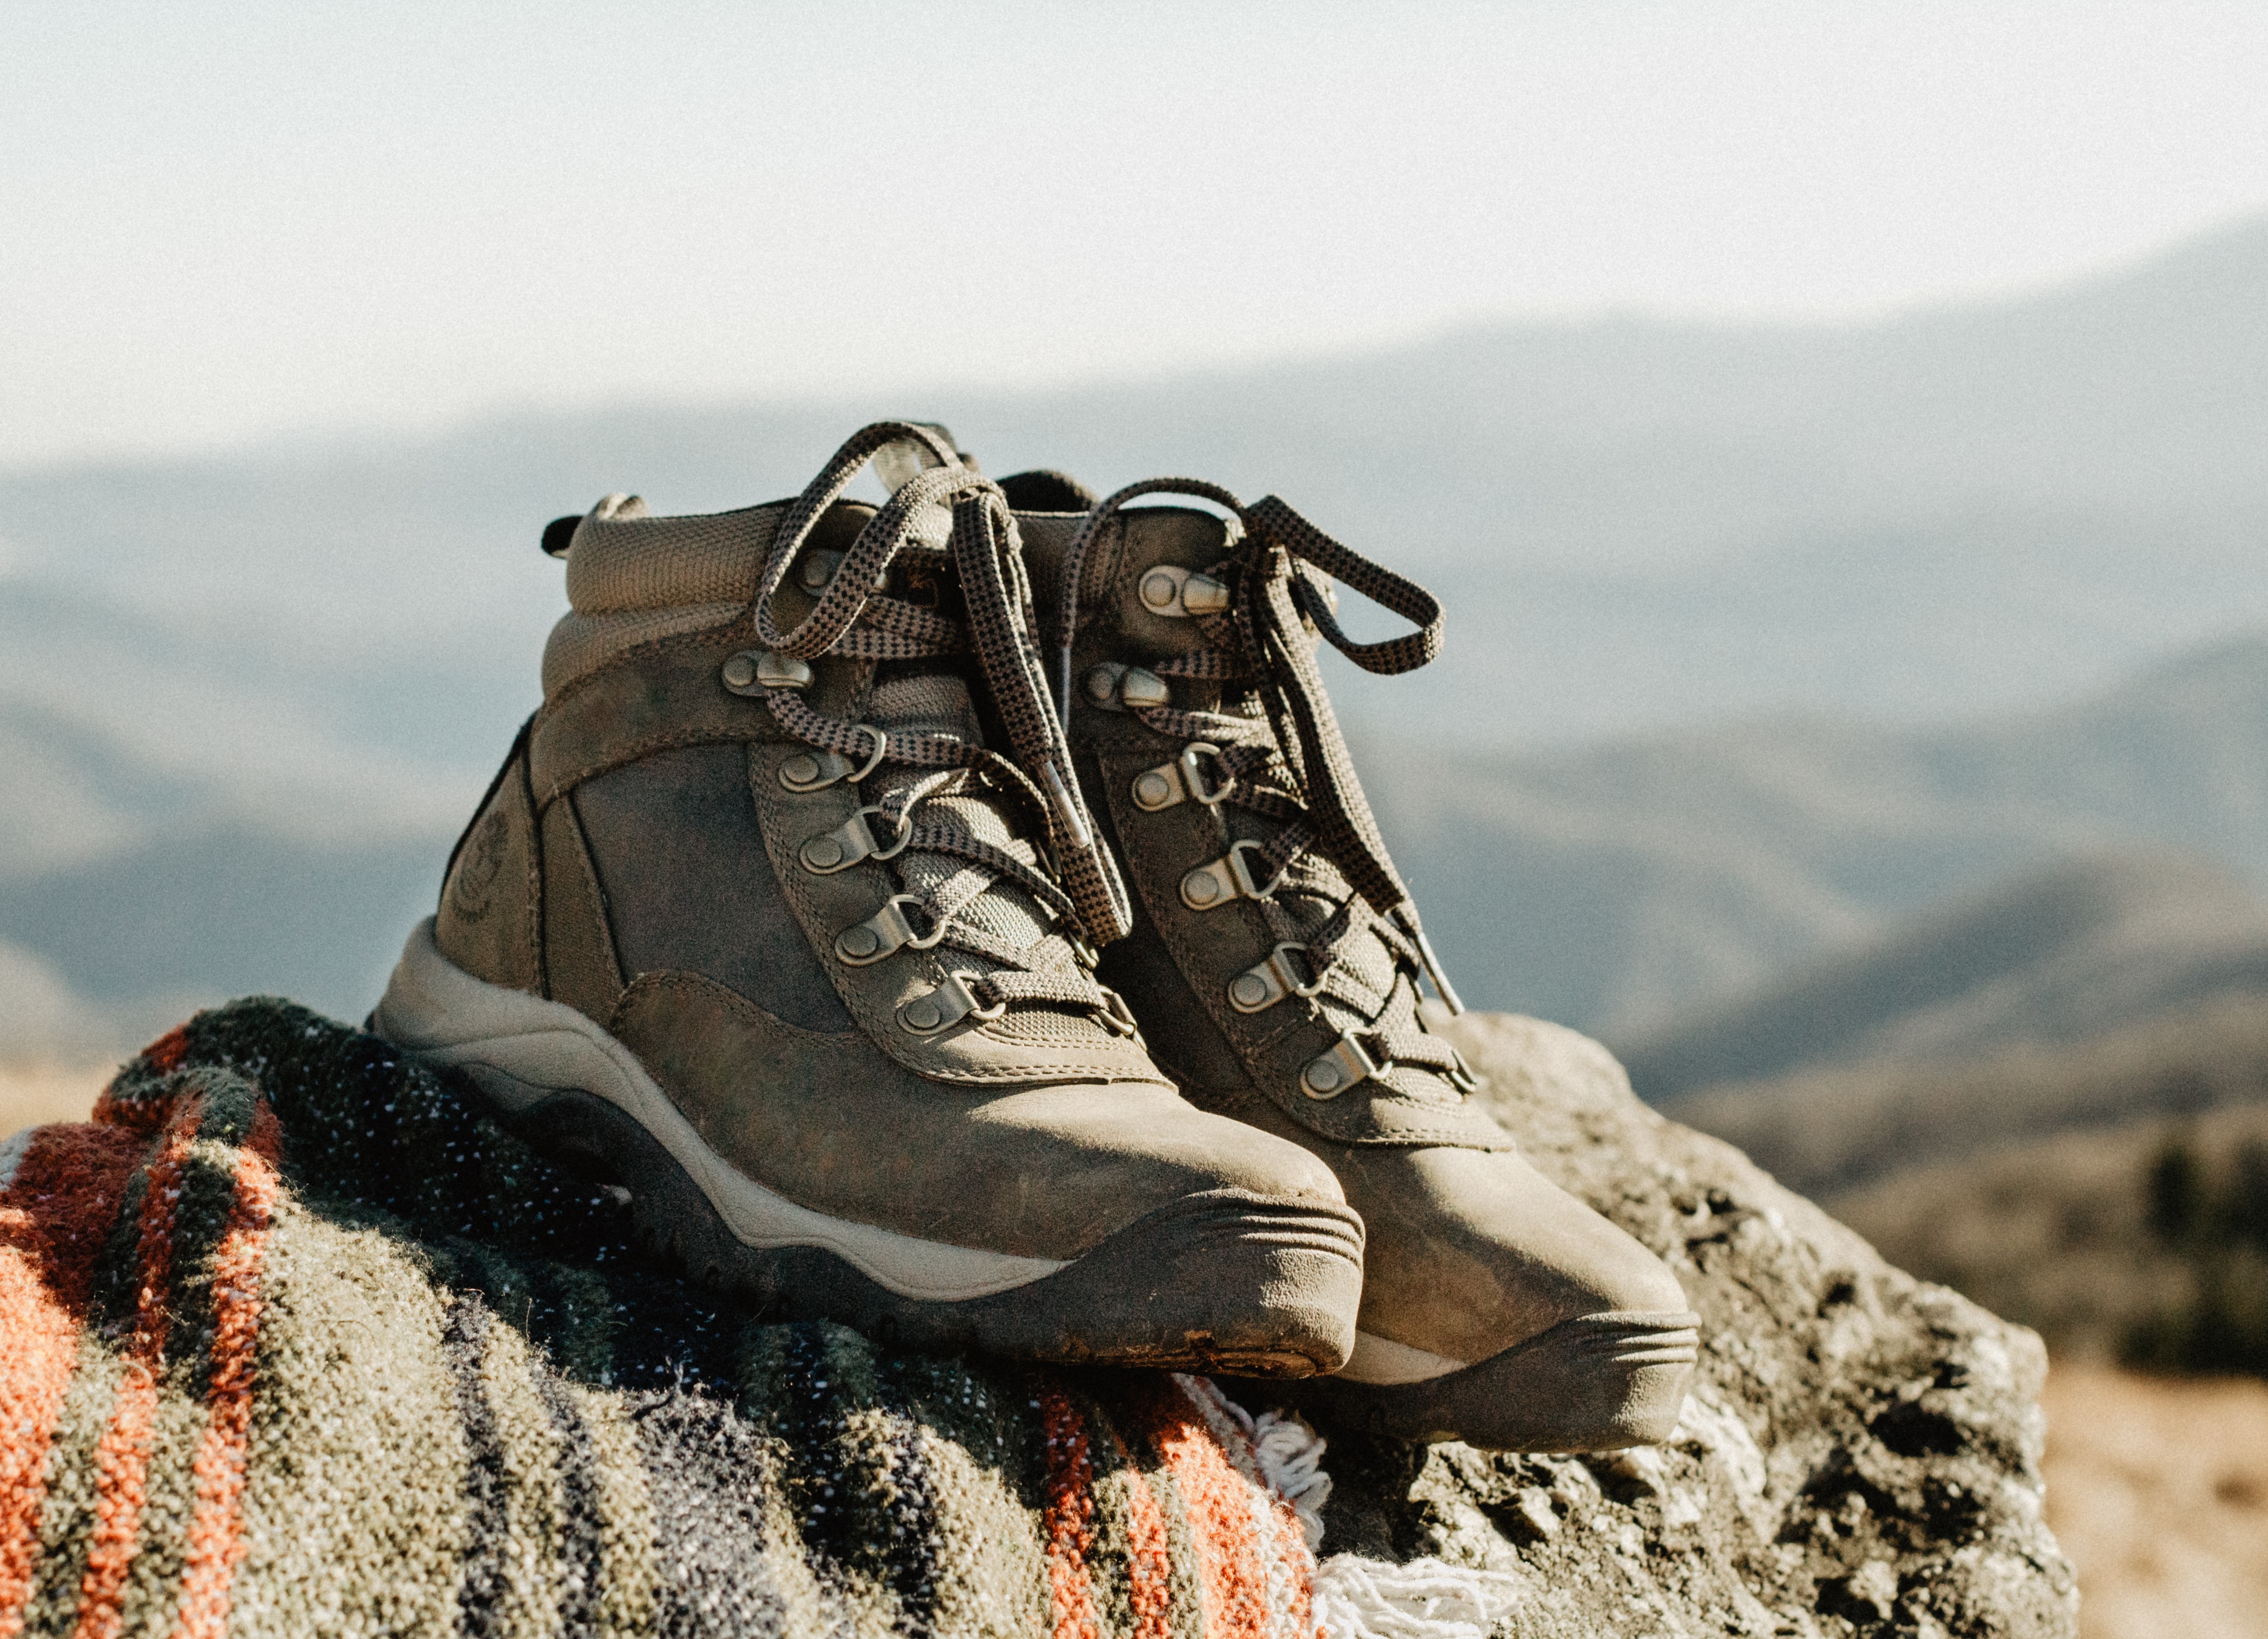 Hiking Boots on a rock